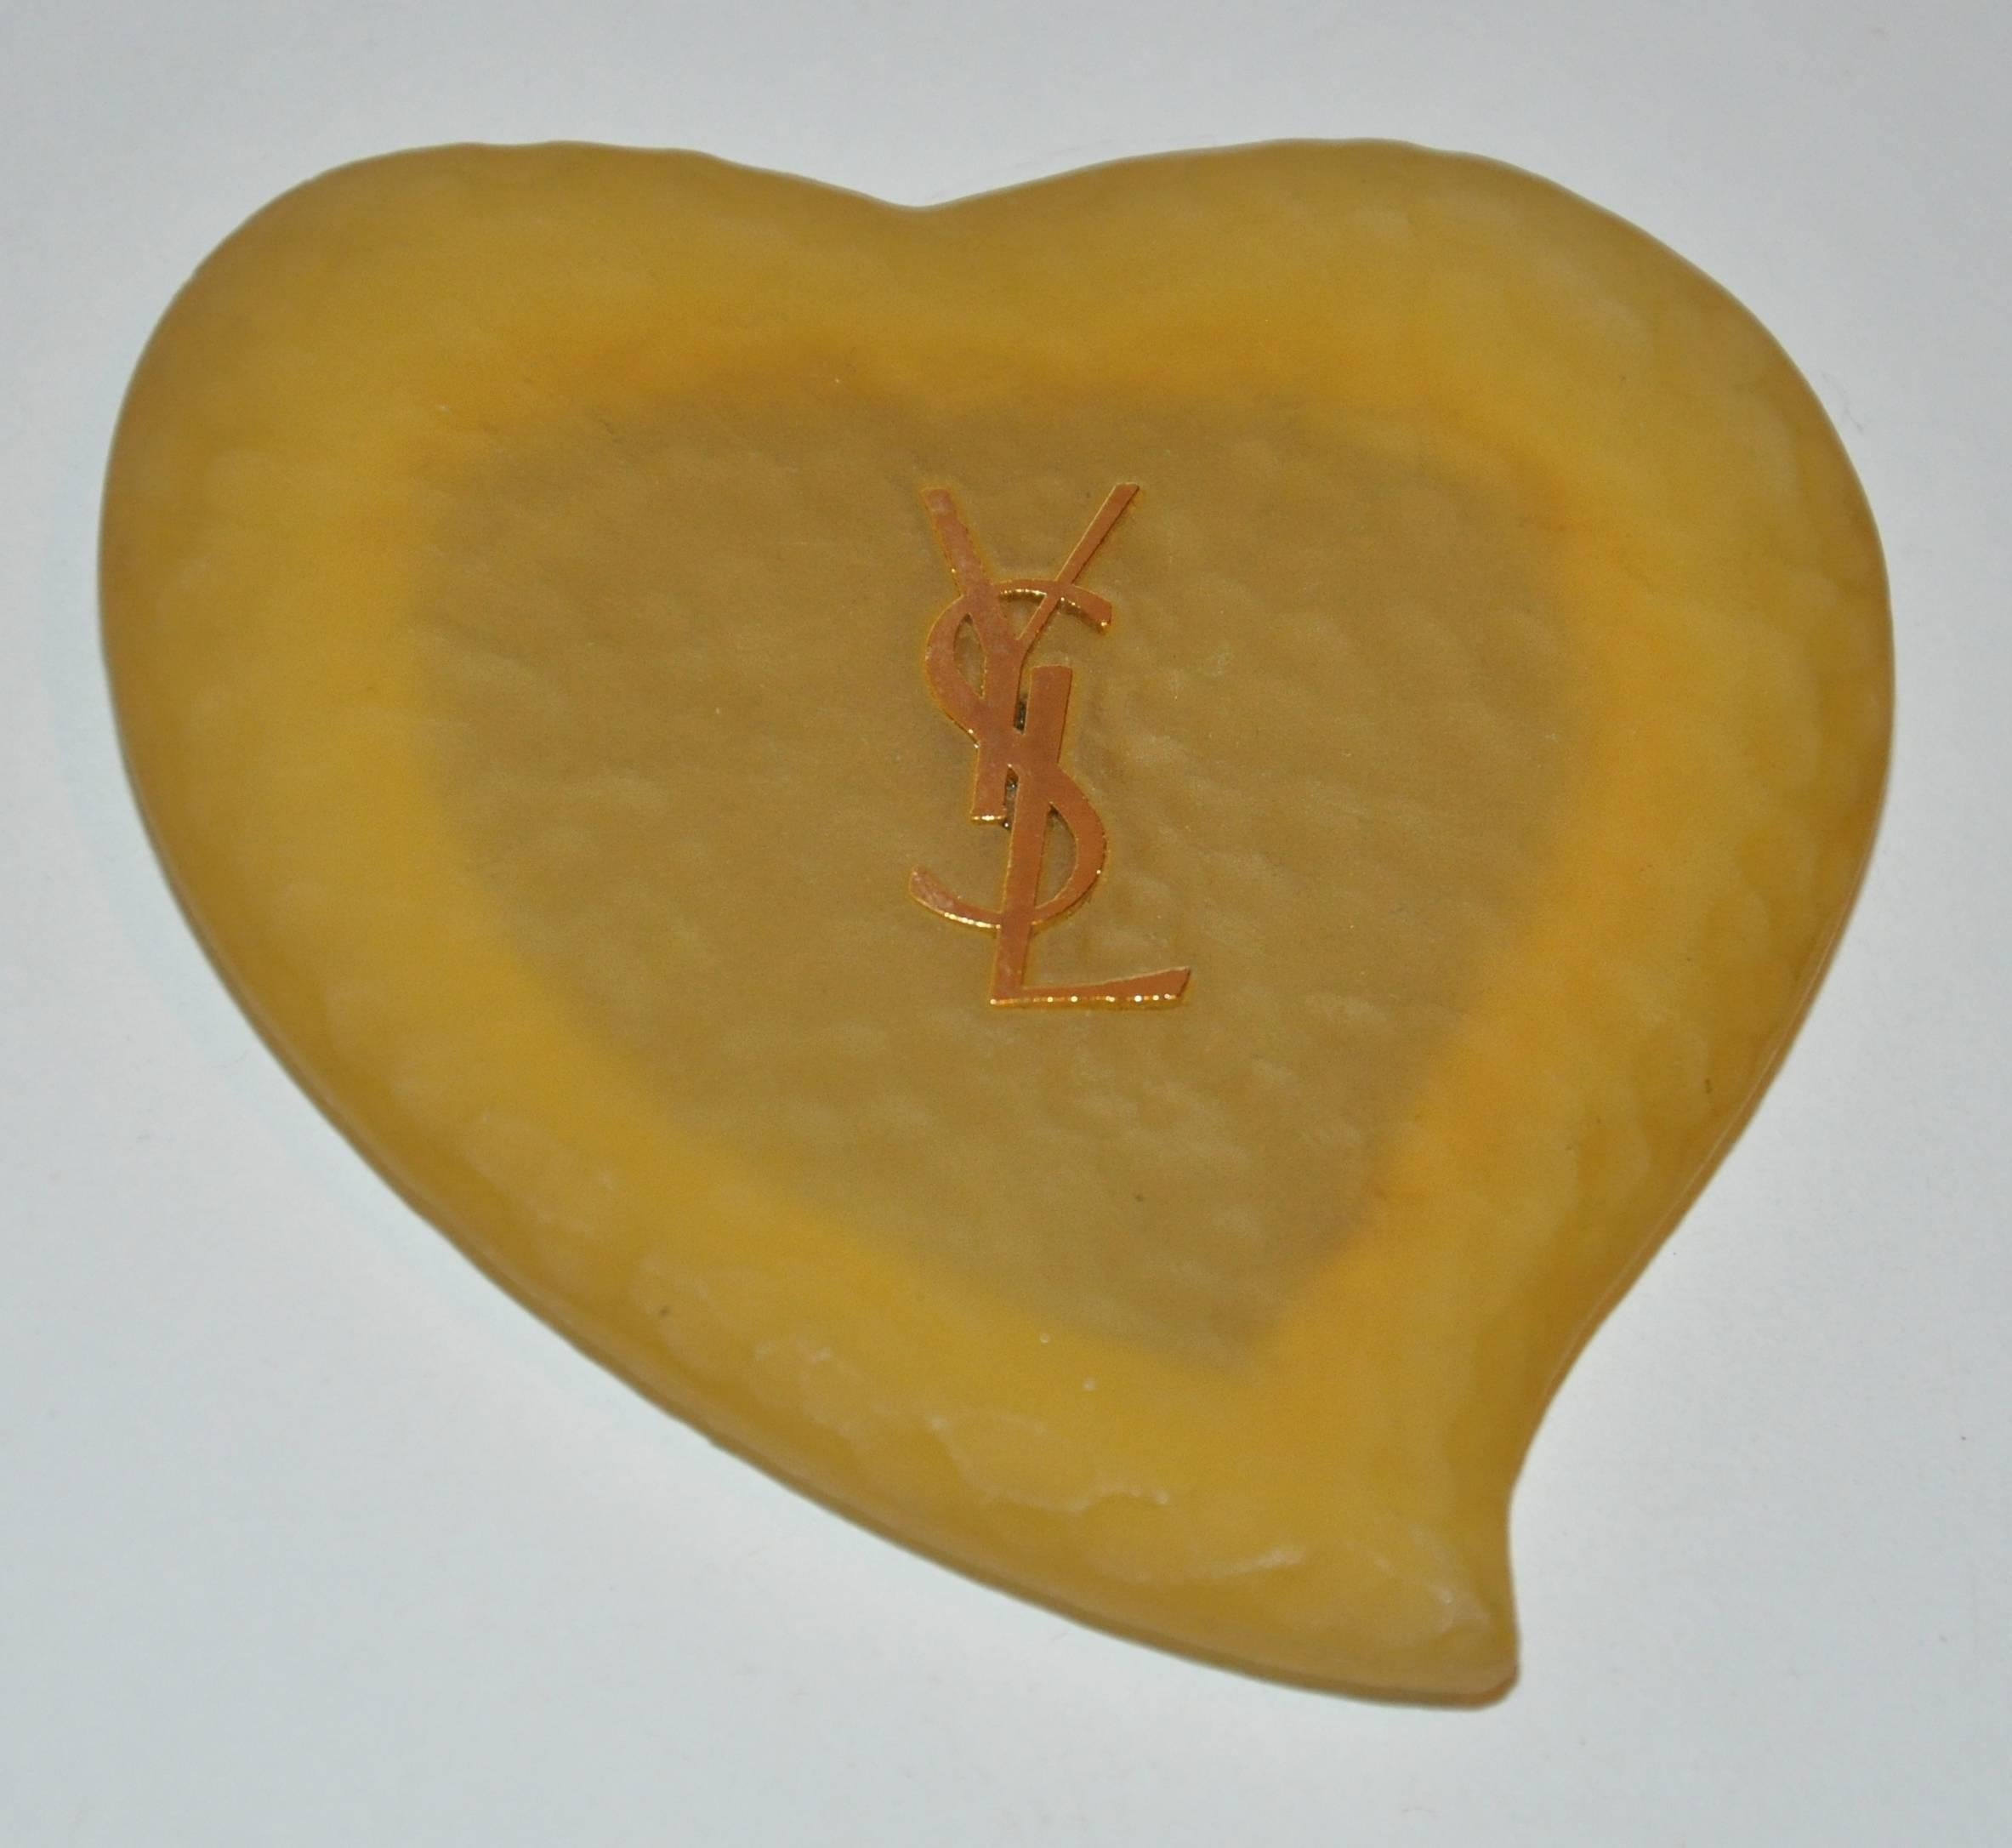         Yves Saint Laurent yellow lucite accented with gold etching "Heart" mirror measures 3 1/4" x 3 1/2" with a depth of 3/8". Made in France.